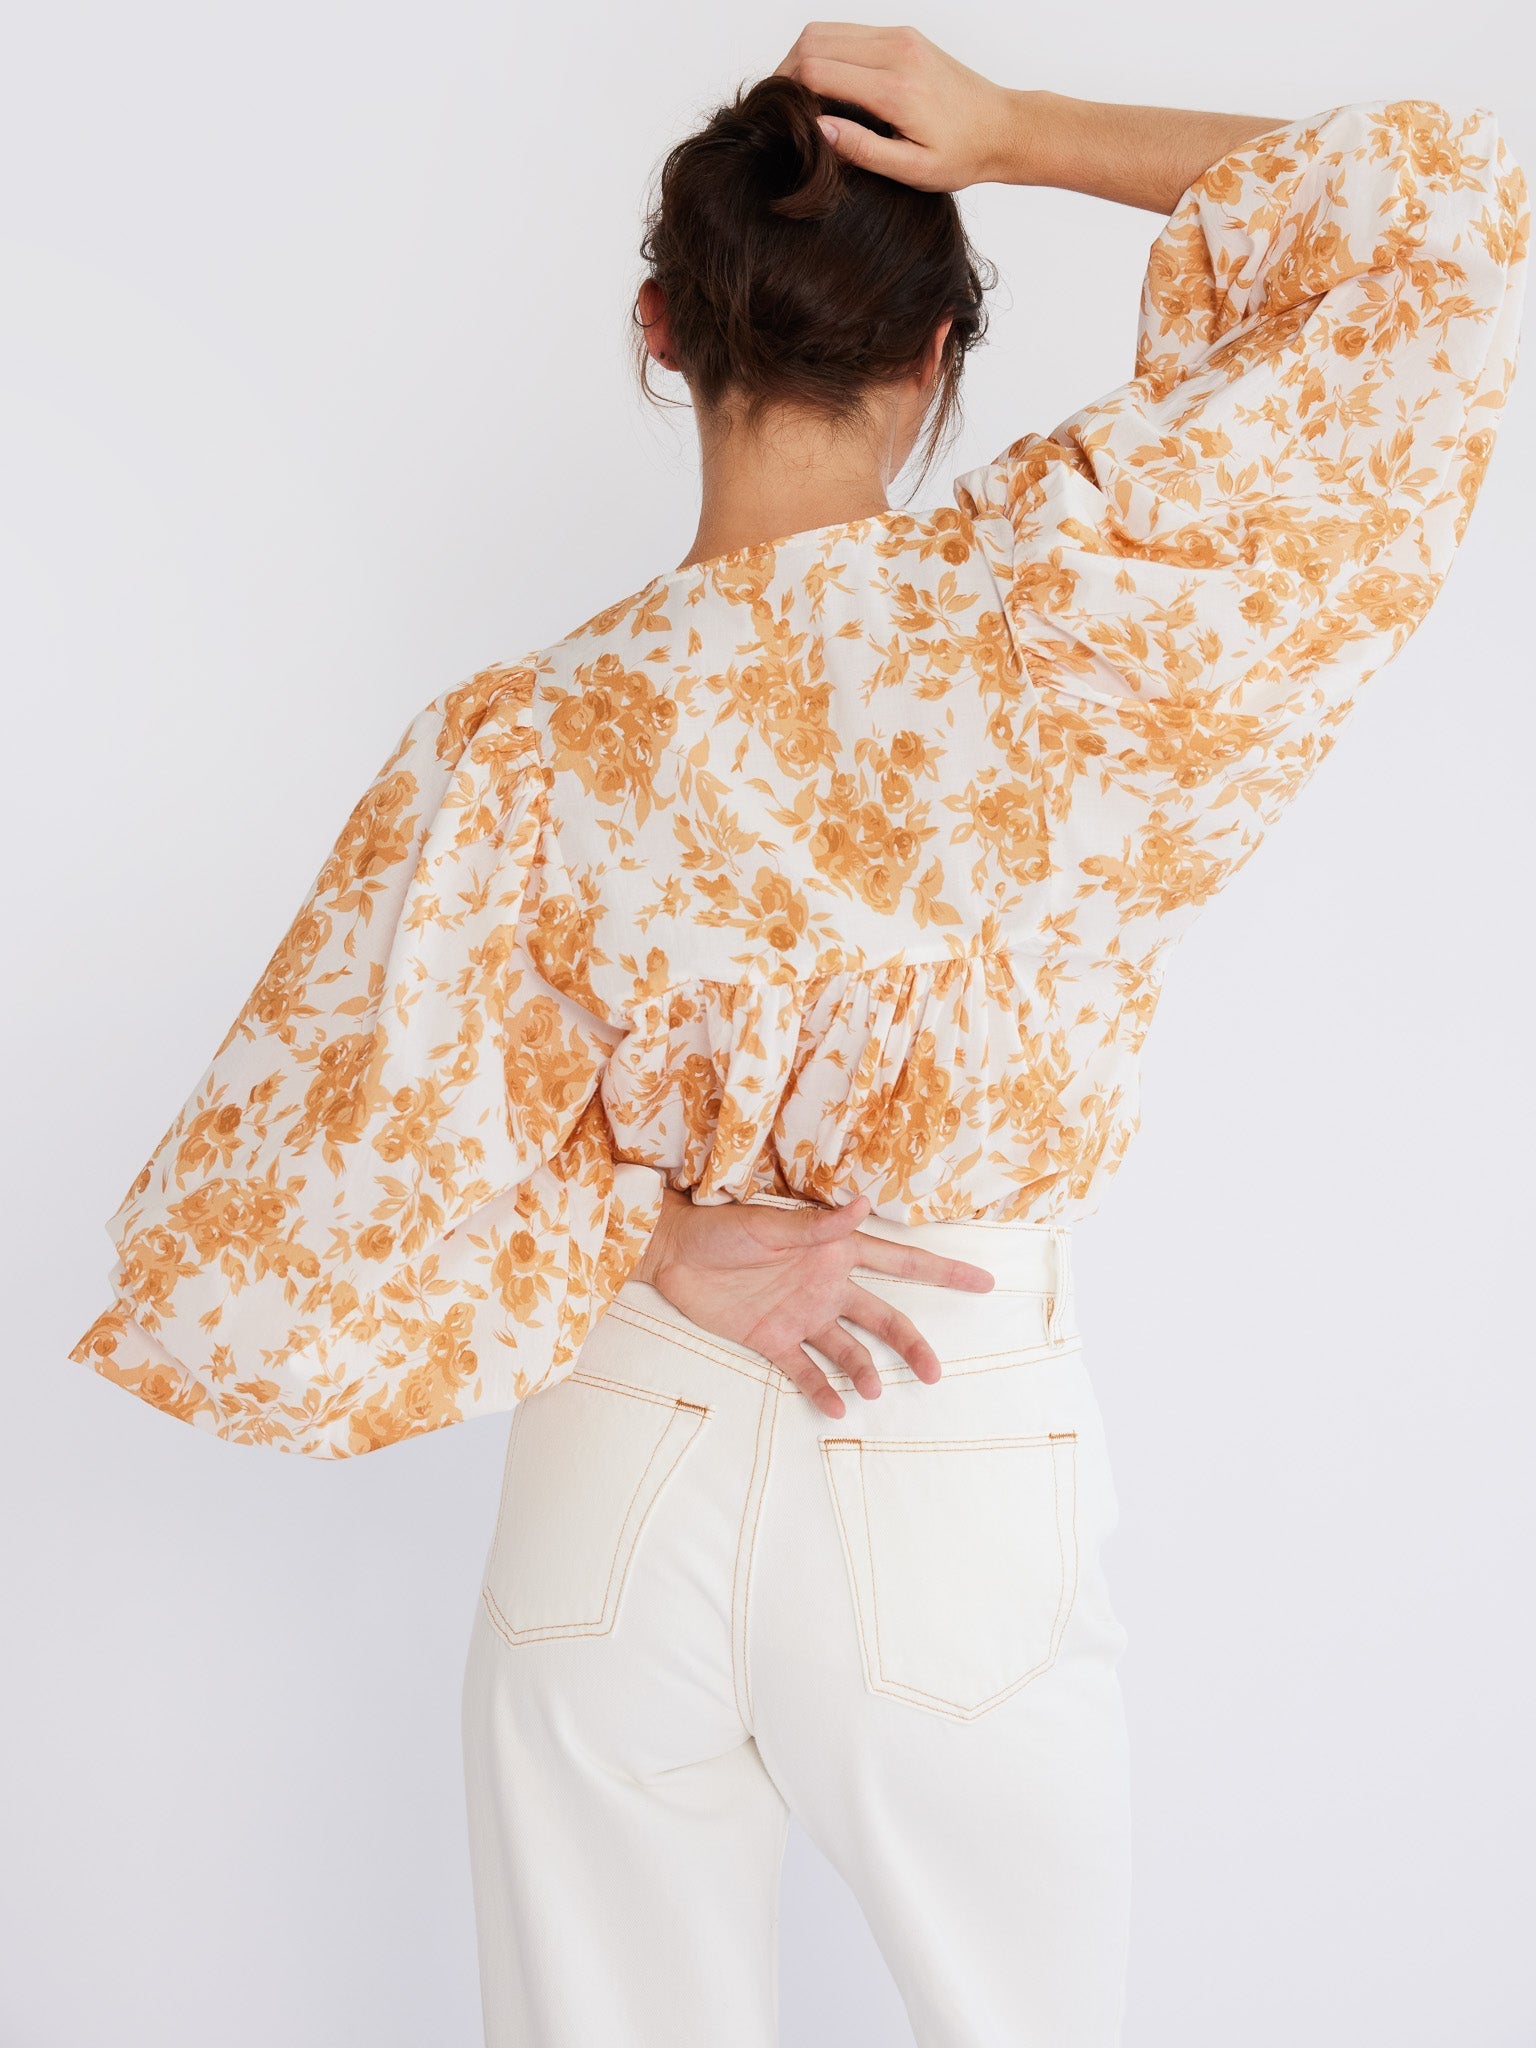 MILLE Clothing Charlie Top in Buttercup